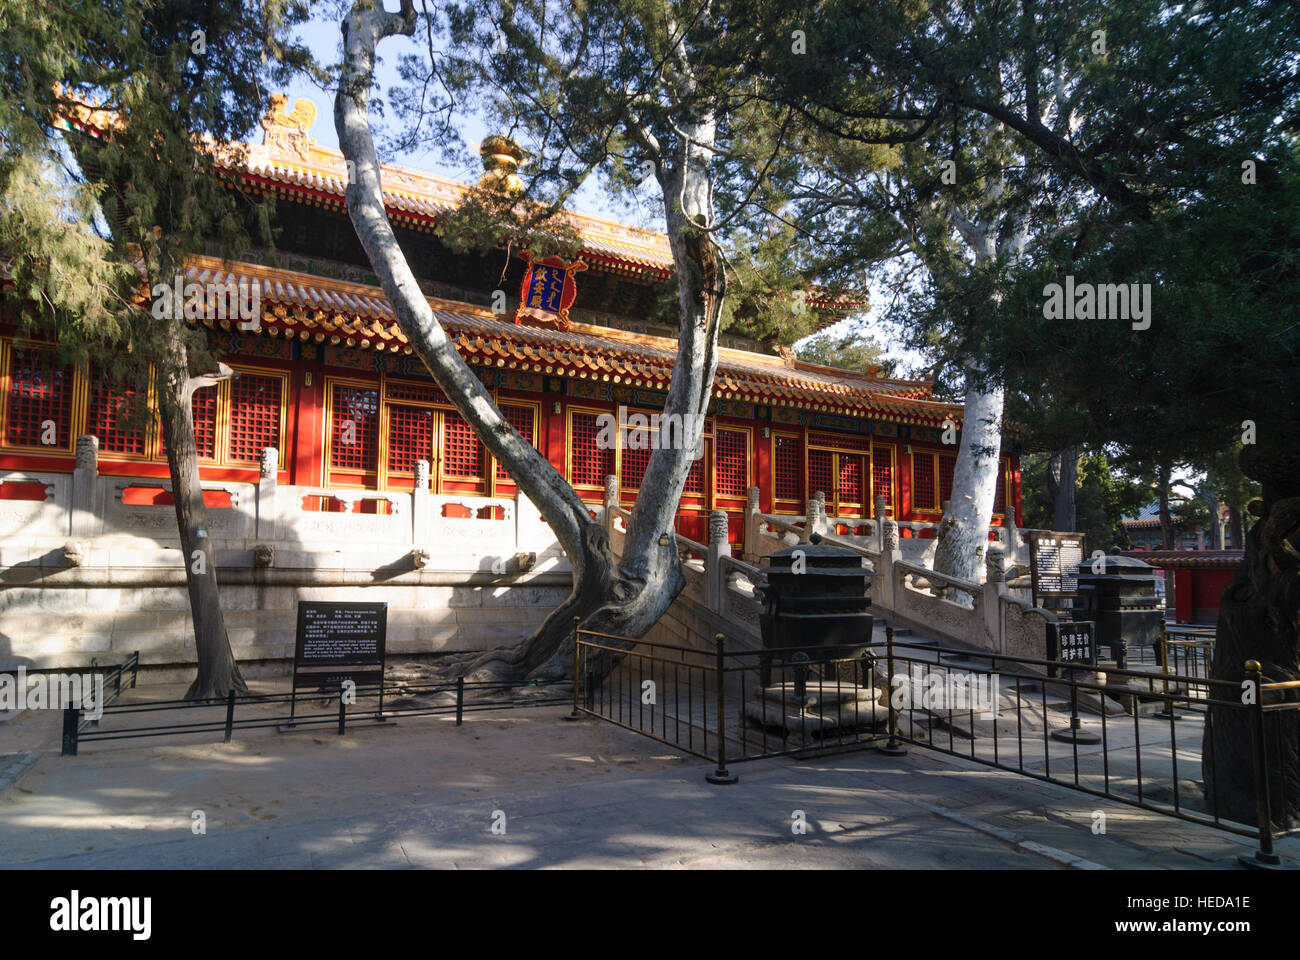 Peking: Forbidden City (Imperial Palace); Palace of the Imperial Peace, Beijing, China Stock Photo